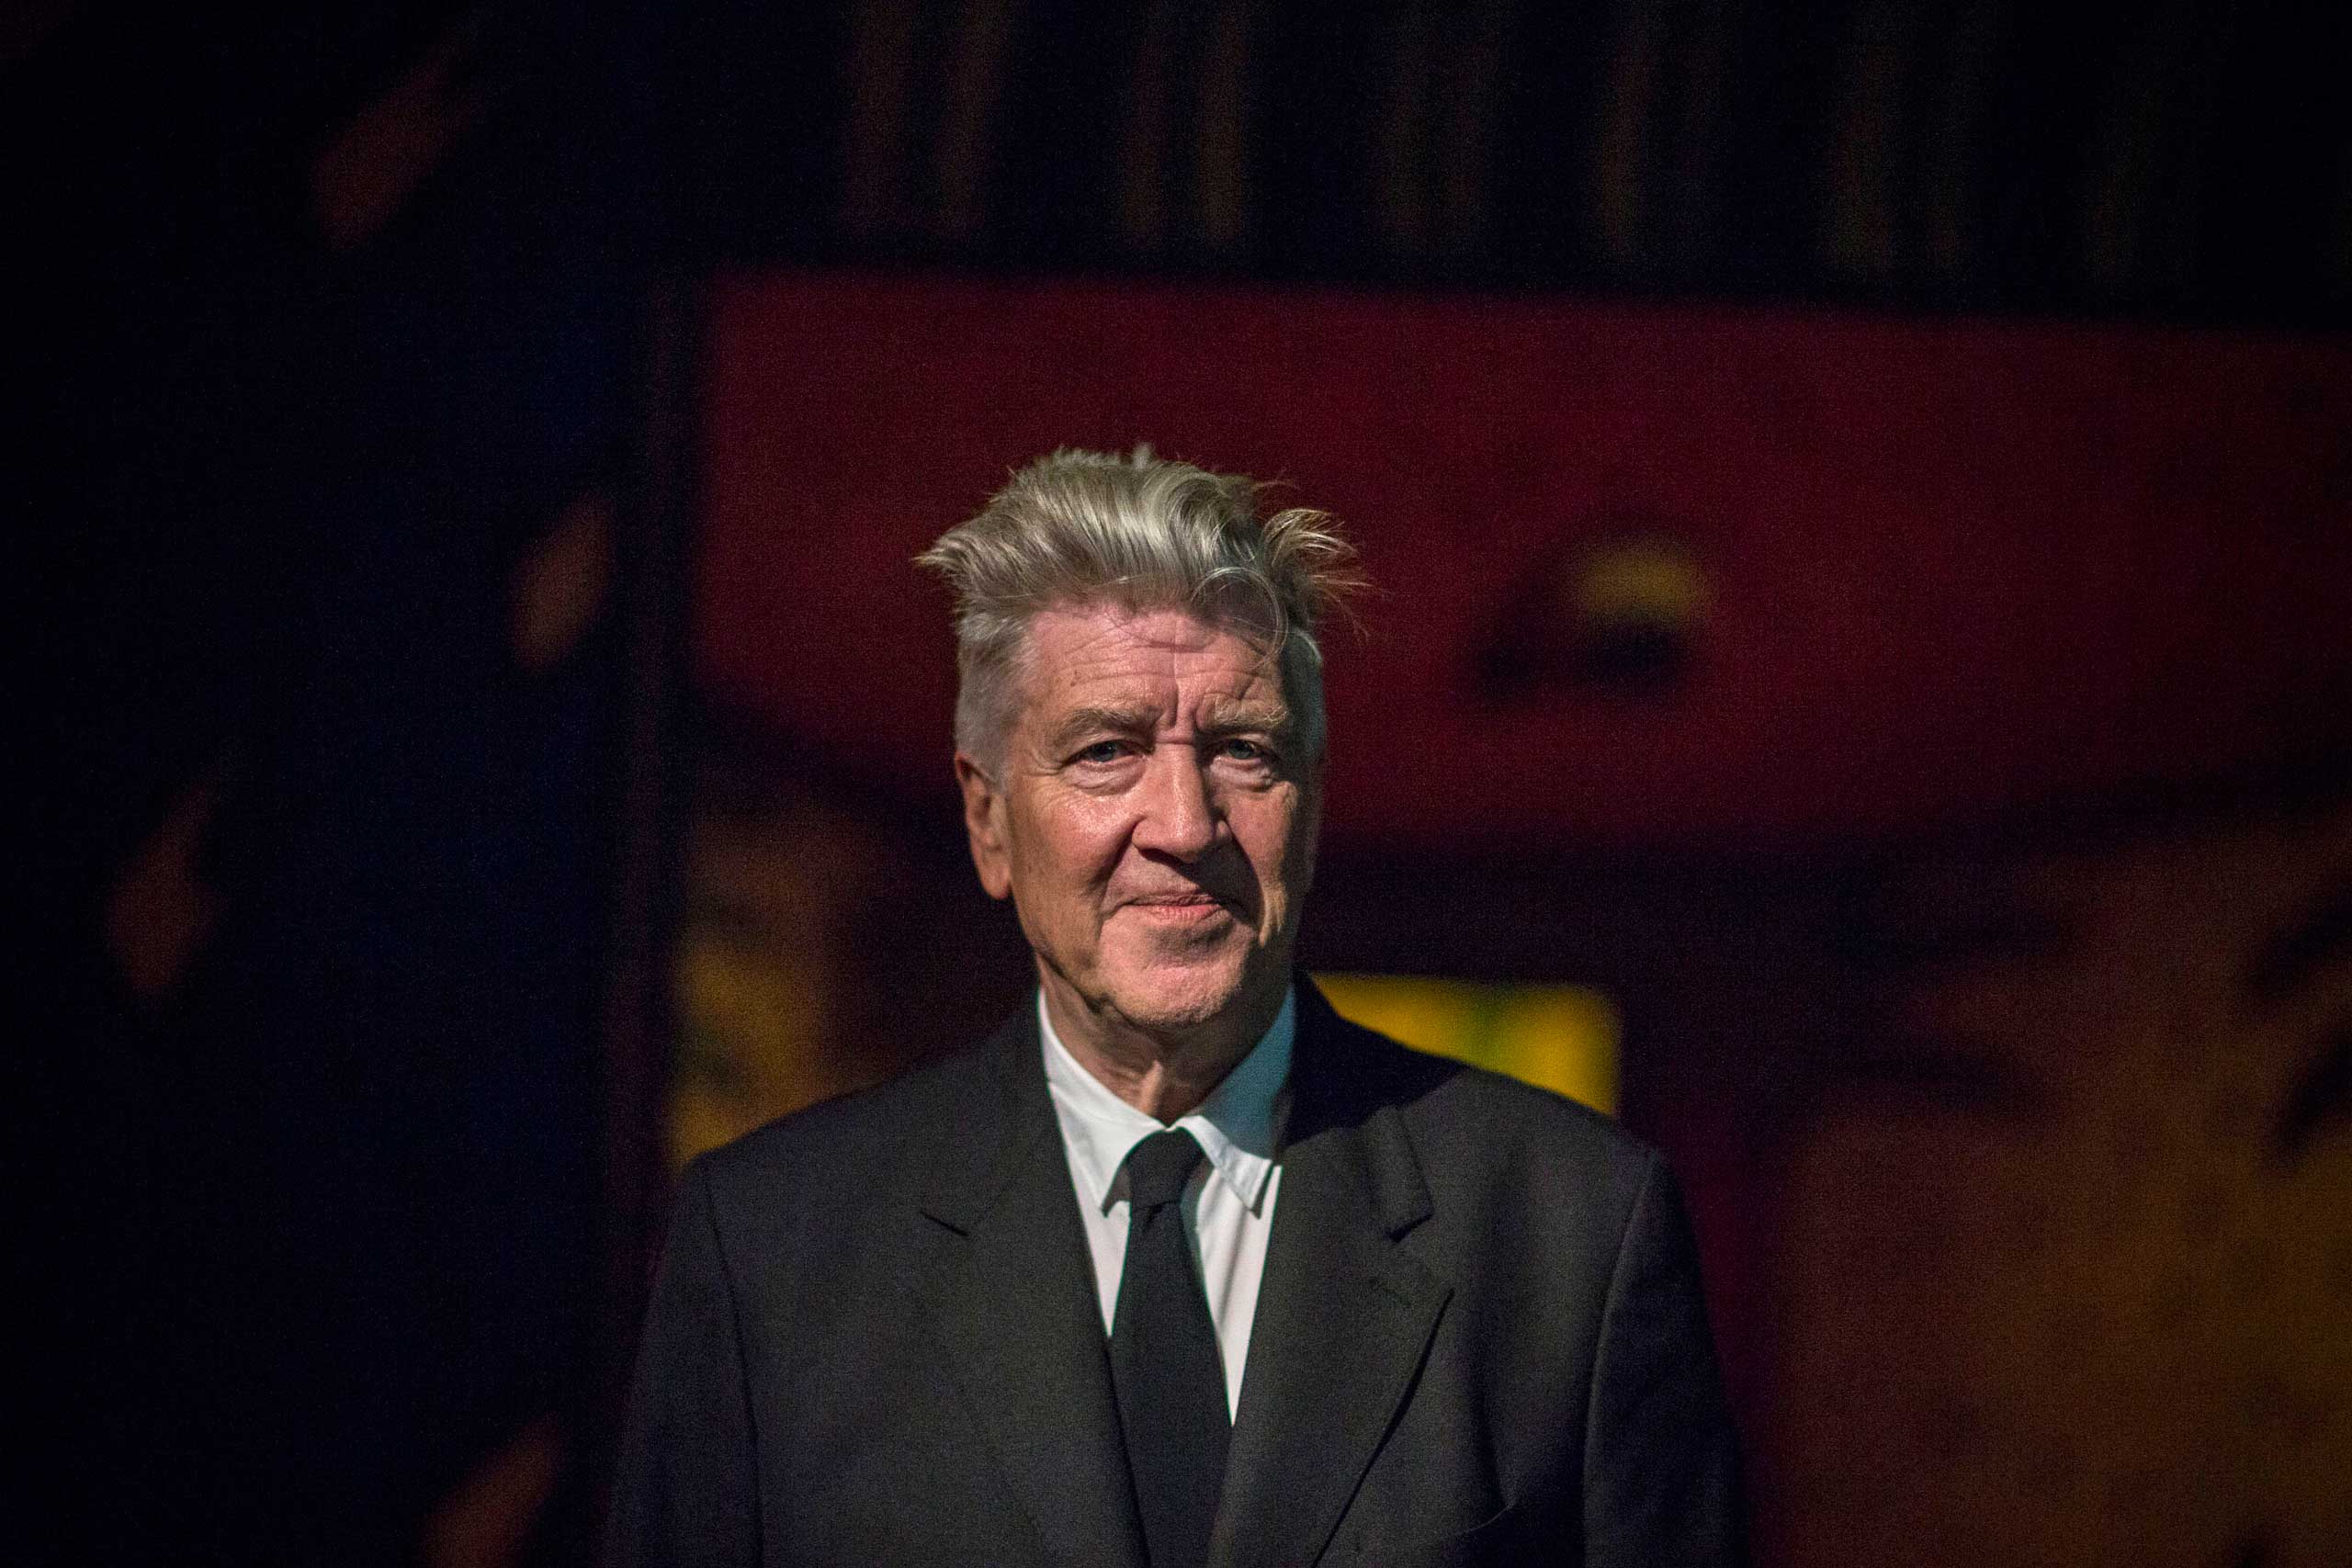 David Lynch at the opening of his exhibition: Between Two Worlds at Gallery of Modern Art (GOMA) in Brisbane, Australia, on Mar. 13, 2015. (Glenn Hunt—Getty Images)